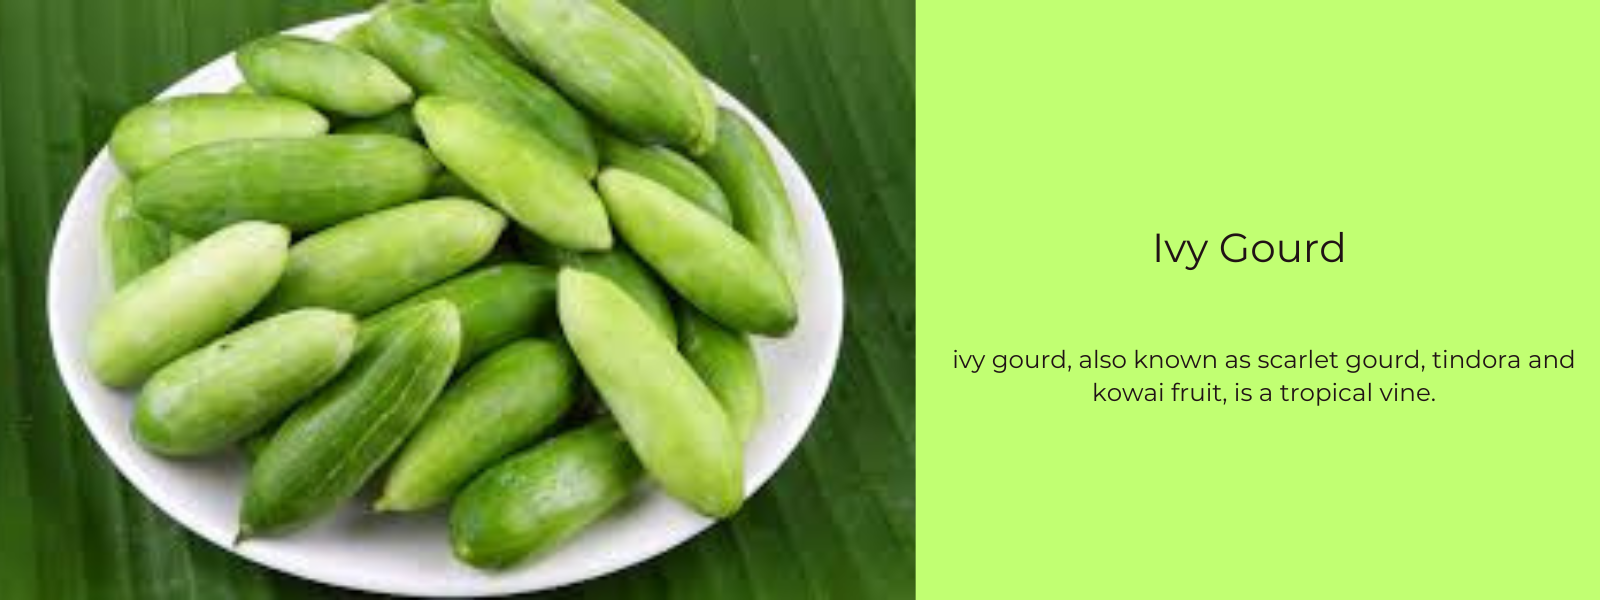 Ivy Gourd – Health Benefits, Uses and Important Facts